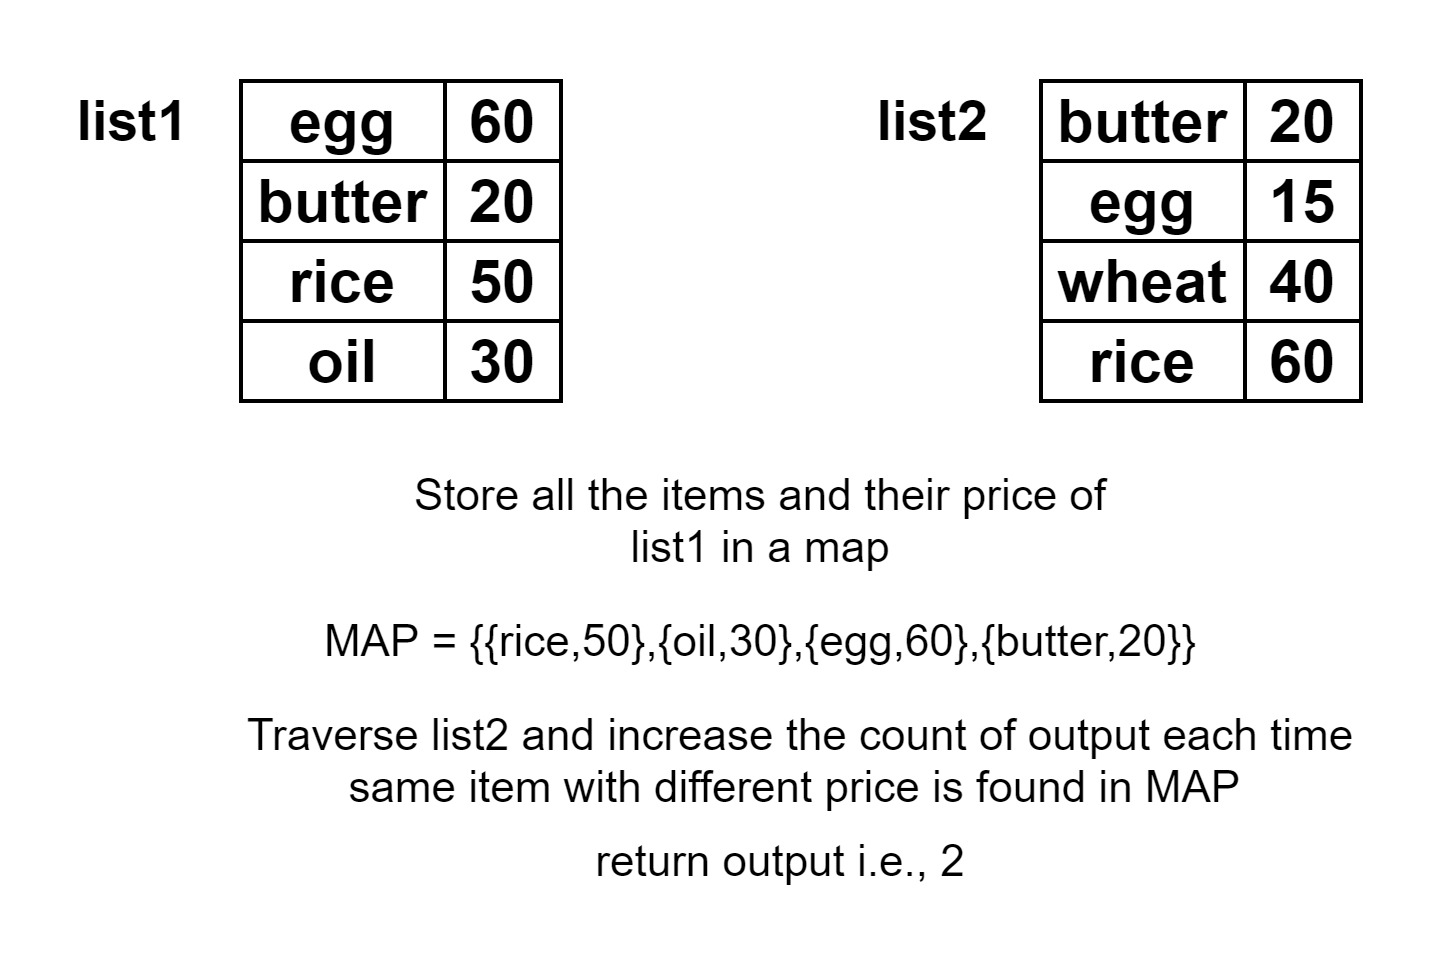 Count items common to both the lists but with different prices